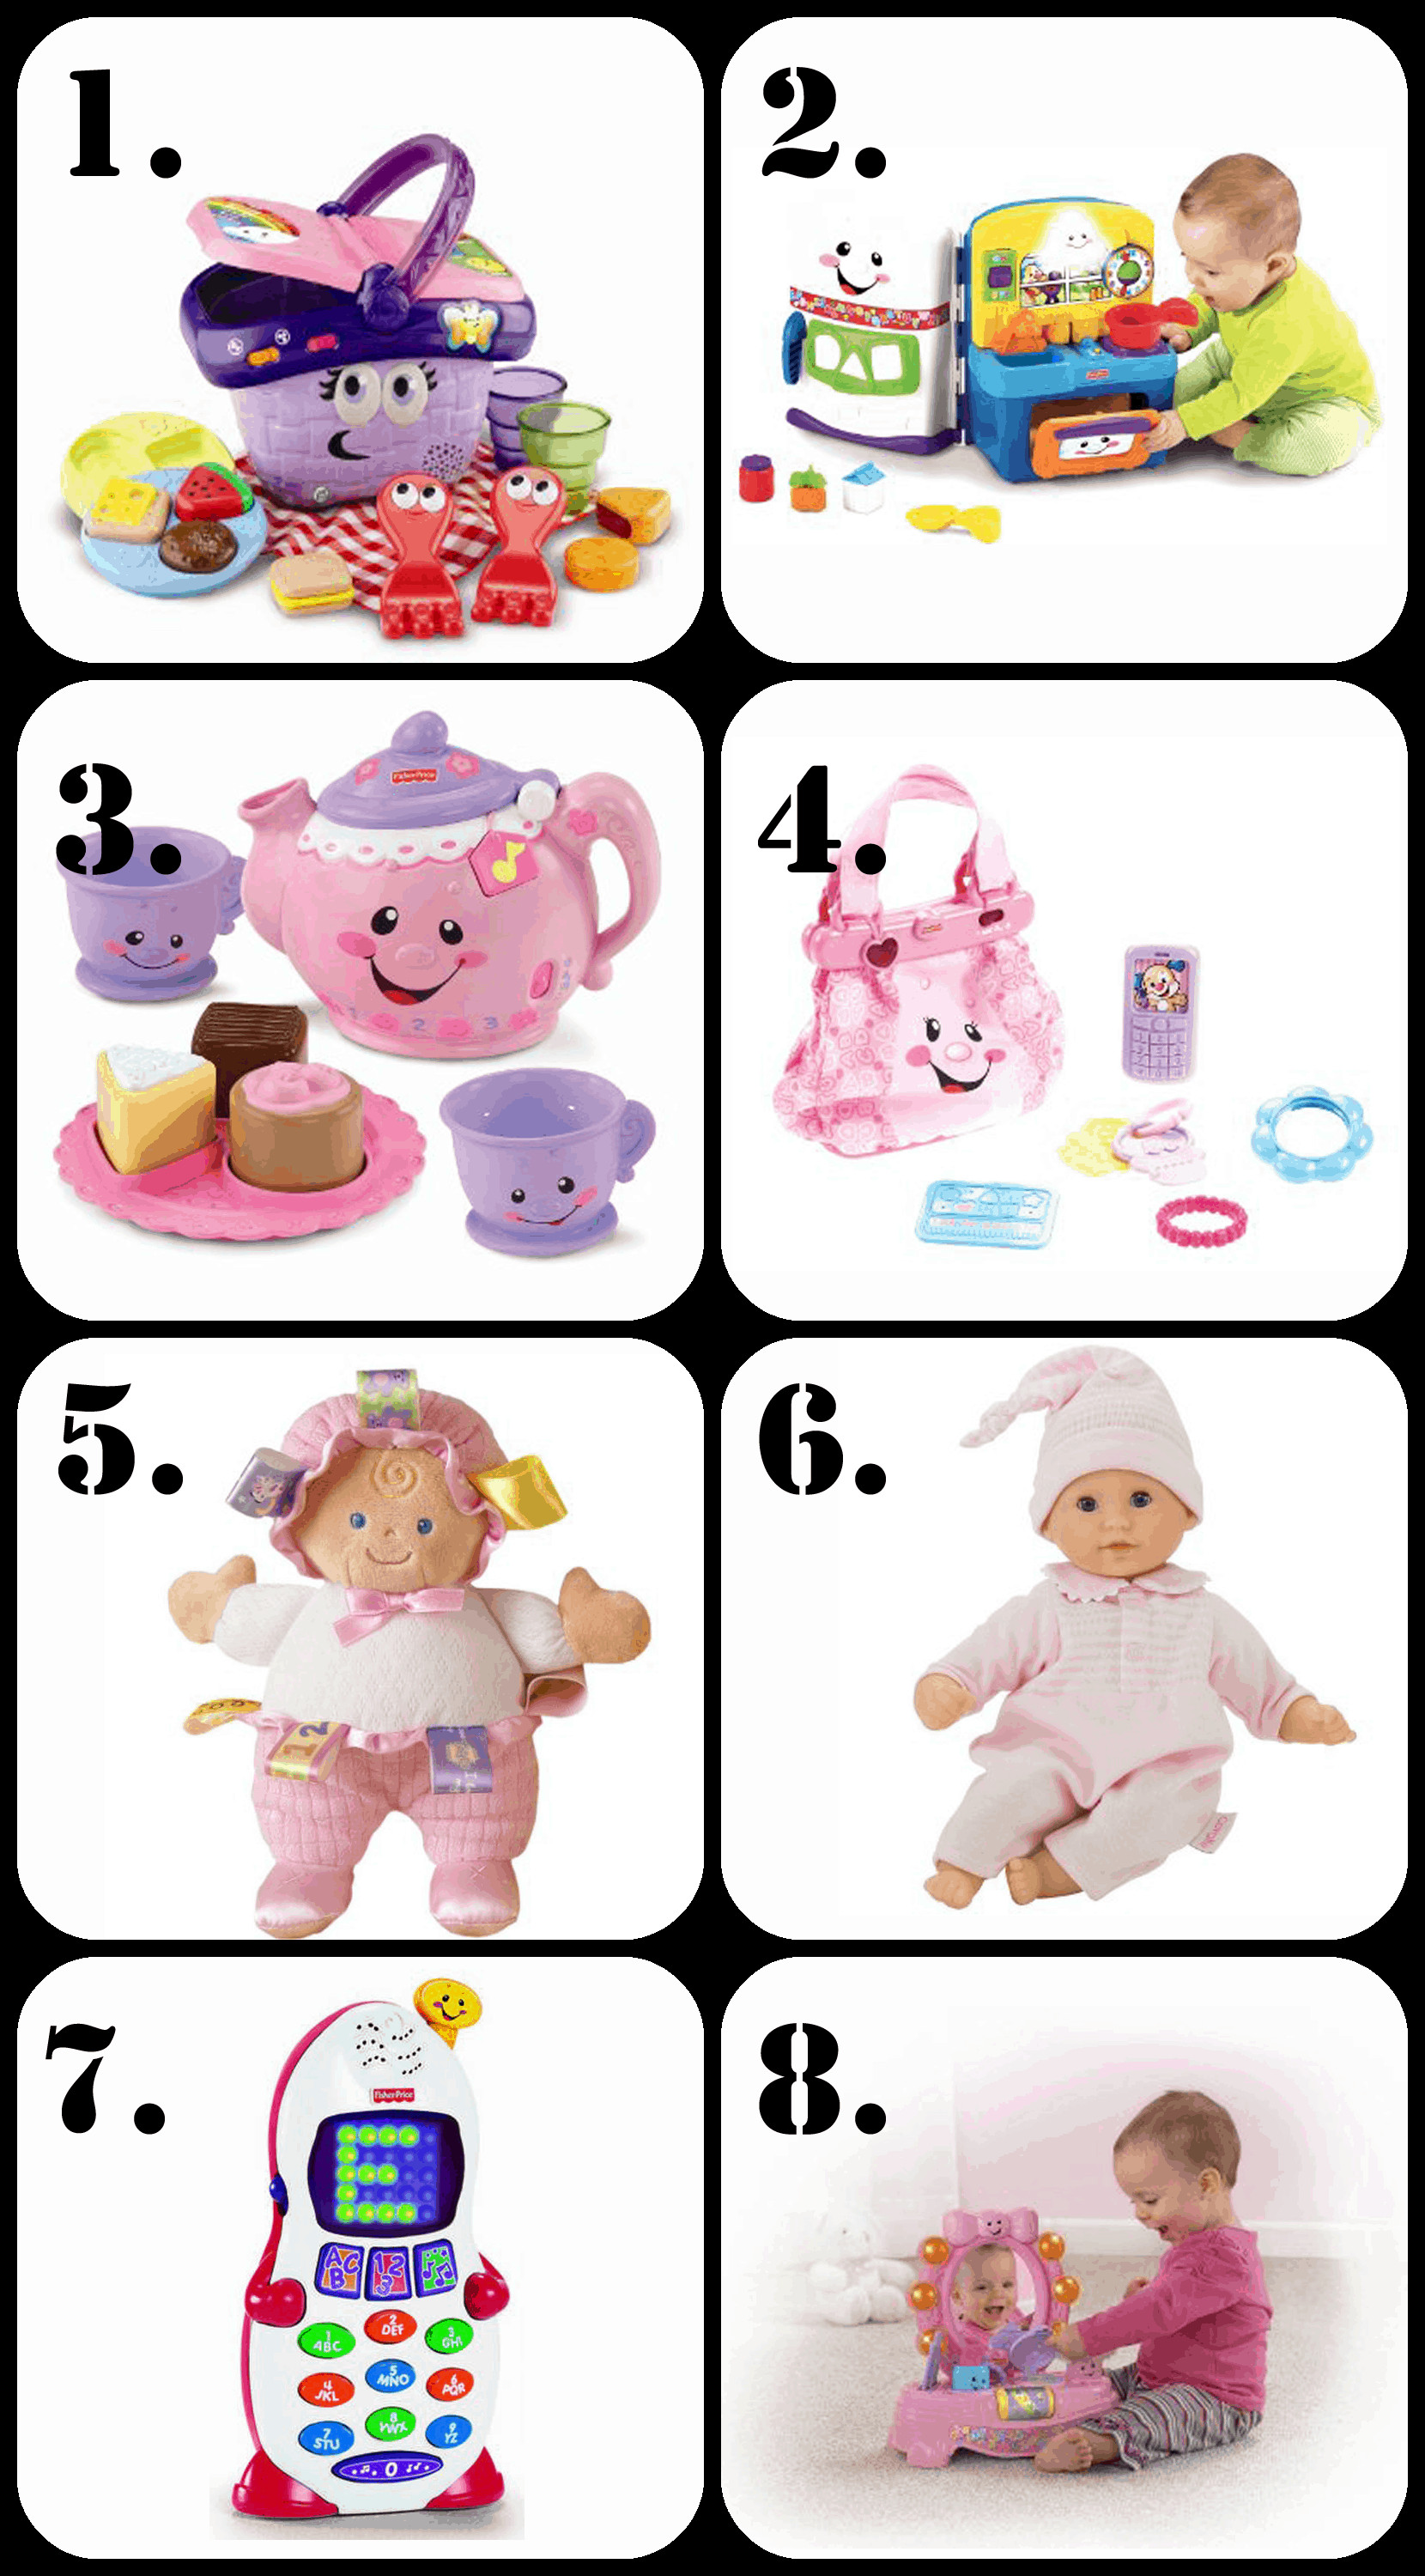 One Year Old Baby Gift Ideas
 The Ultimate List of Gift Ideas for a 1 Year Old Girl